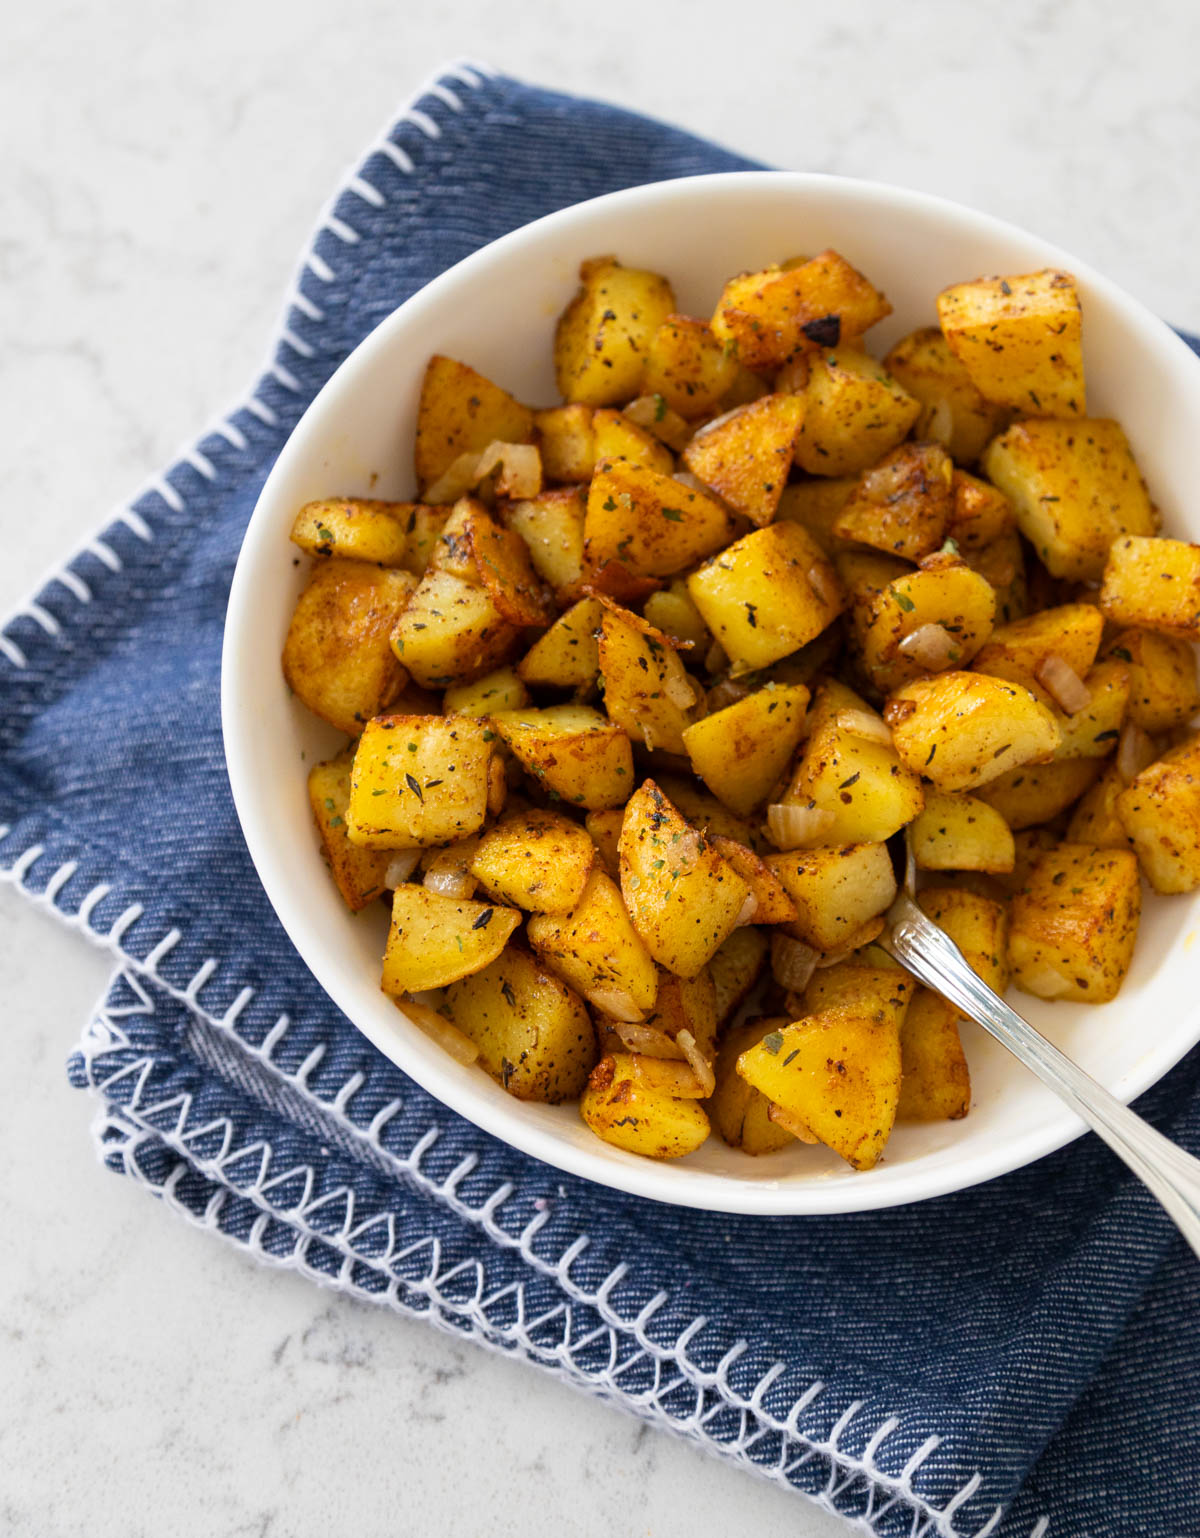 The home fries are in a white bowl with a serving spoon.